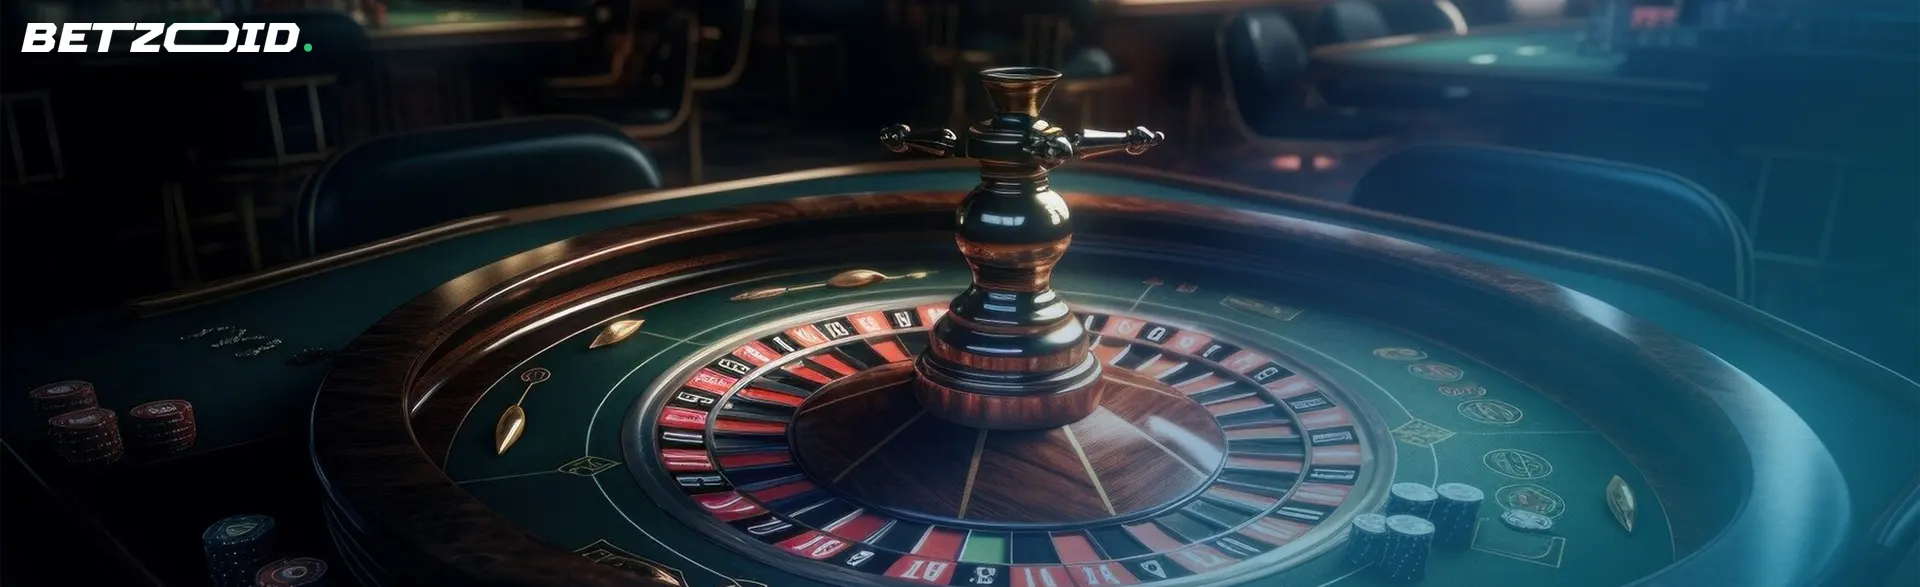 Spinning roulette at online casinos.